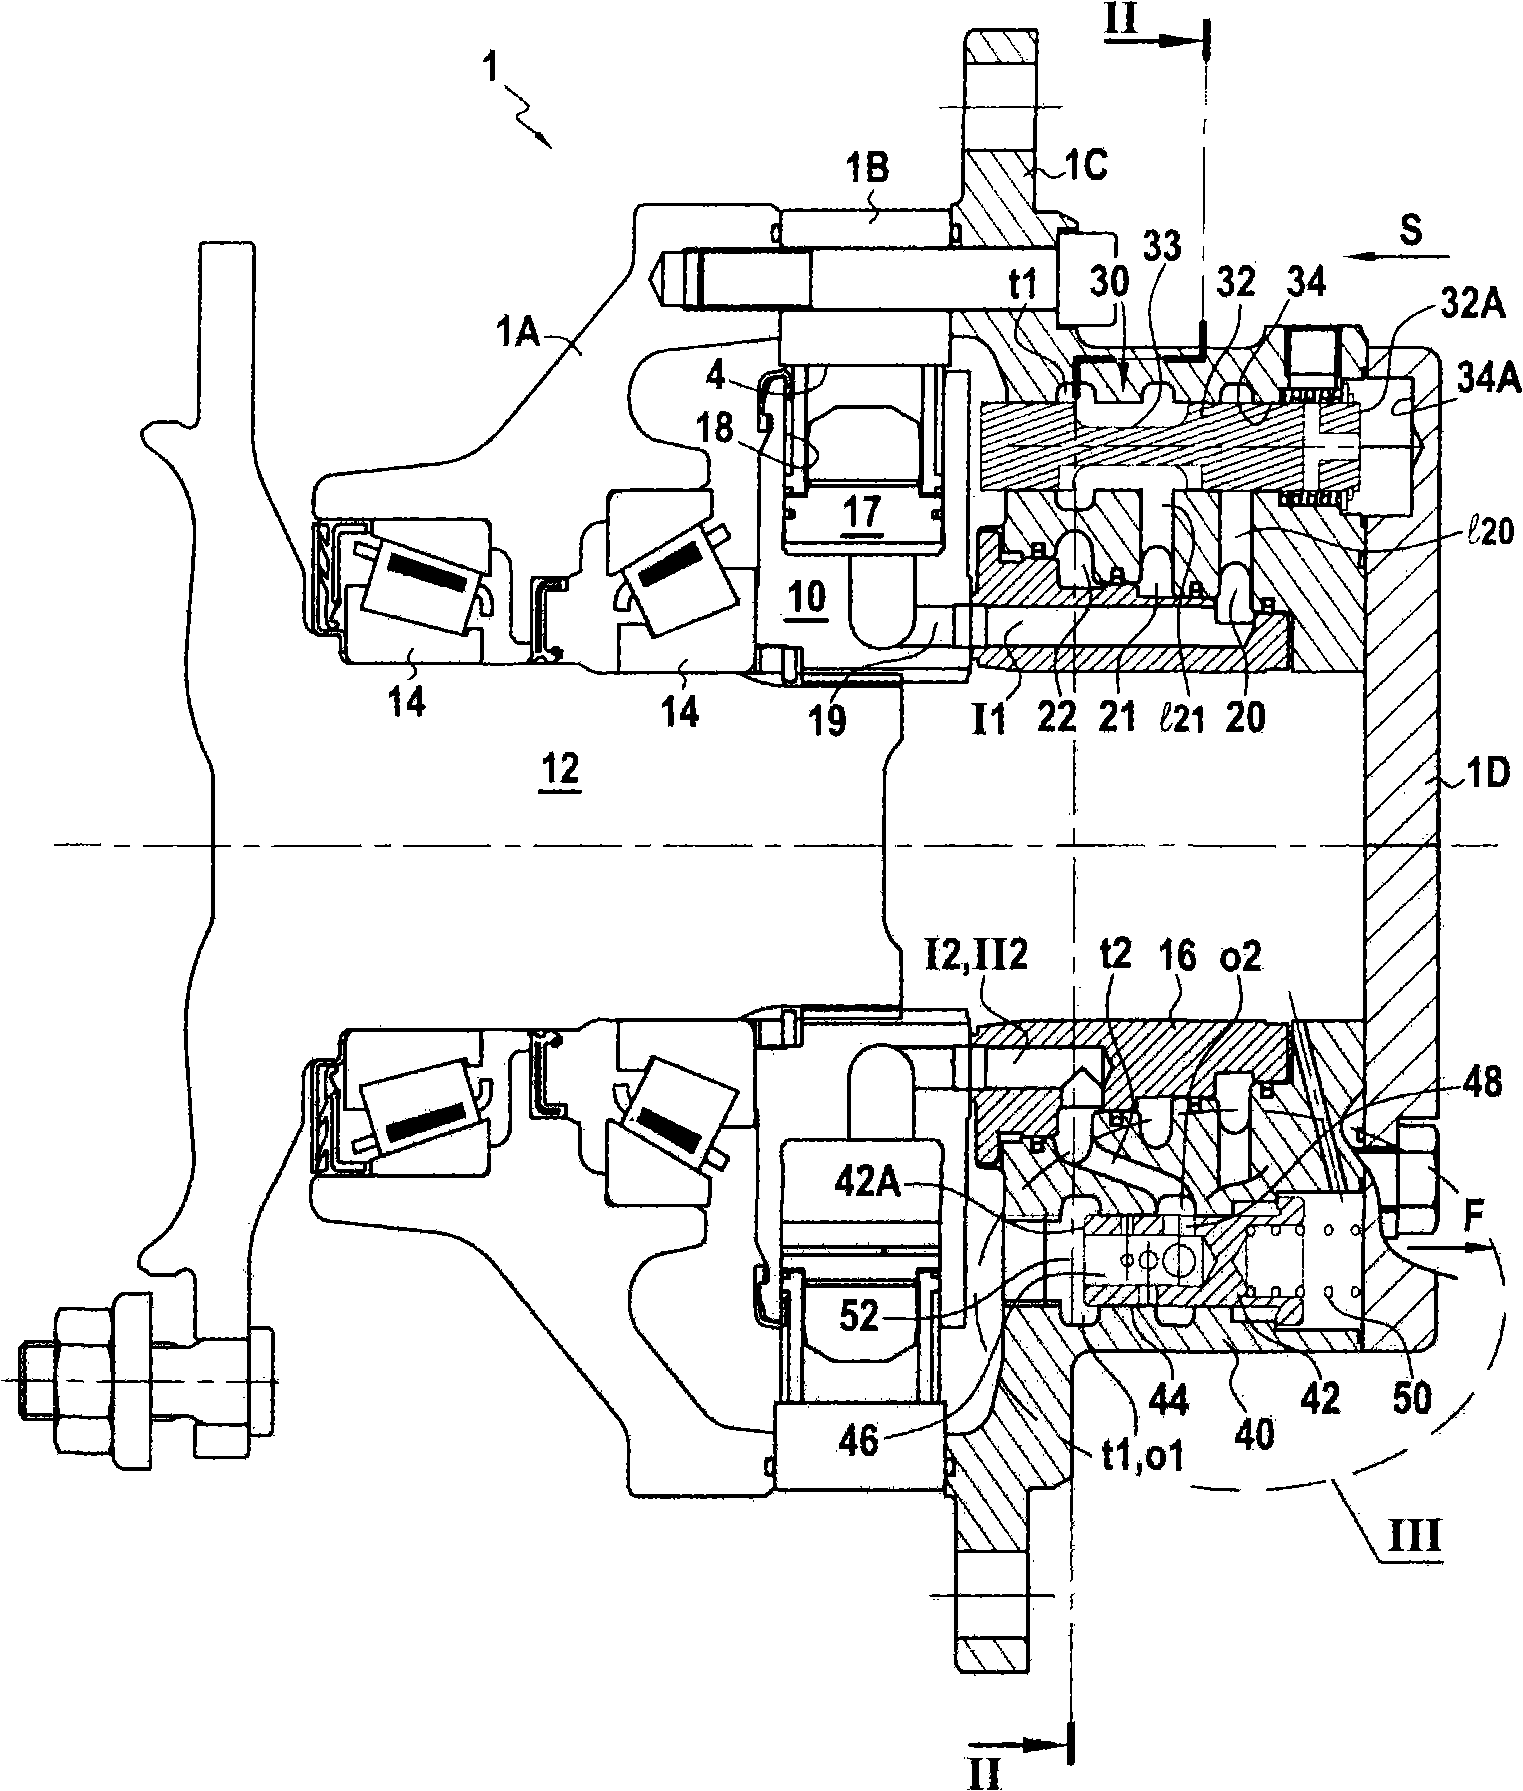 Device for managing the displacement of a hydraulic motor or a group of hydraulic motors